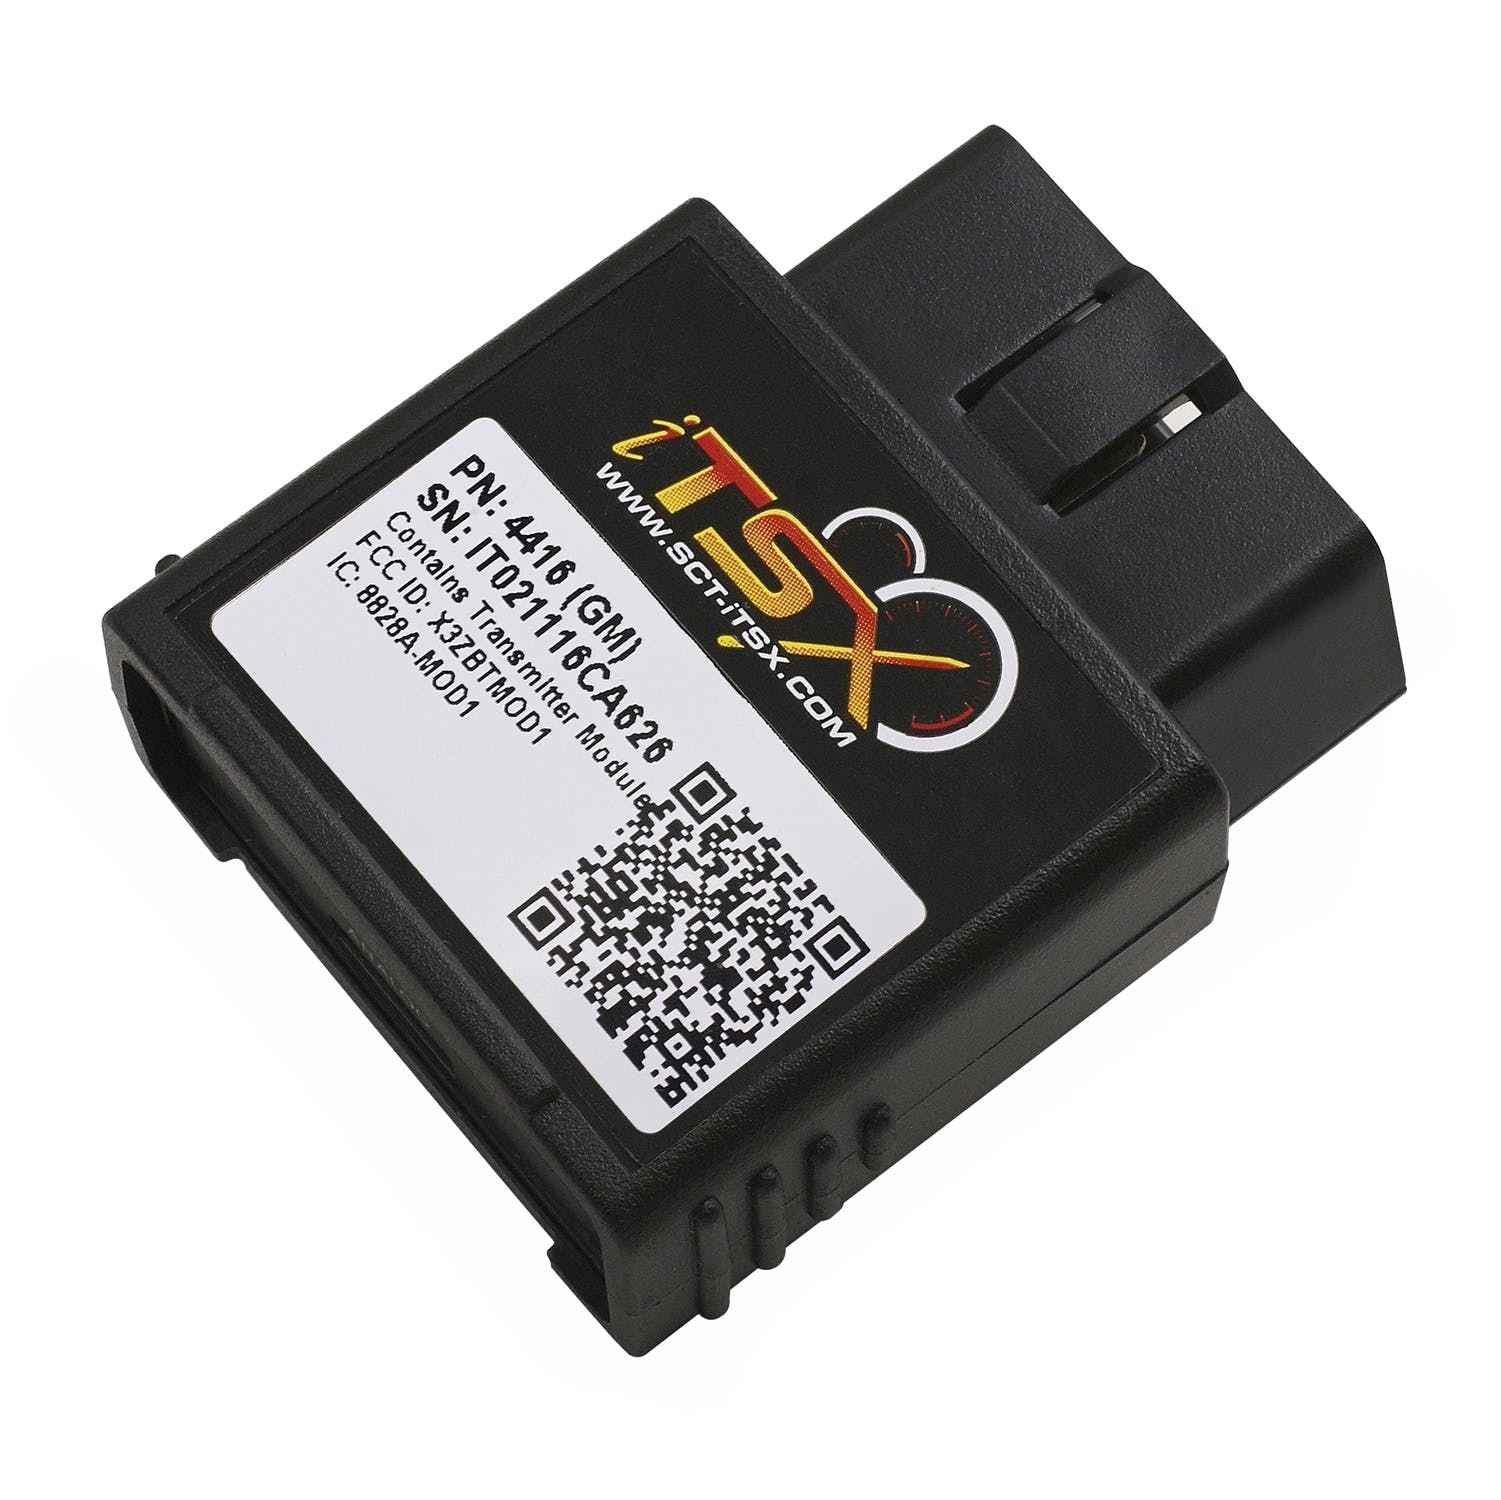 SCT 4416 iTSX / TSX for Android Wireless Vehicle Programmers